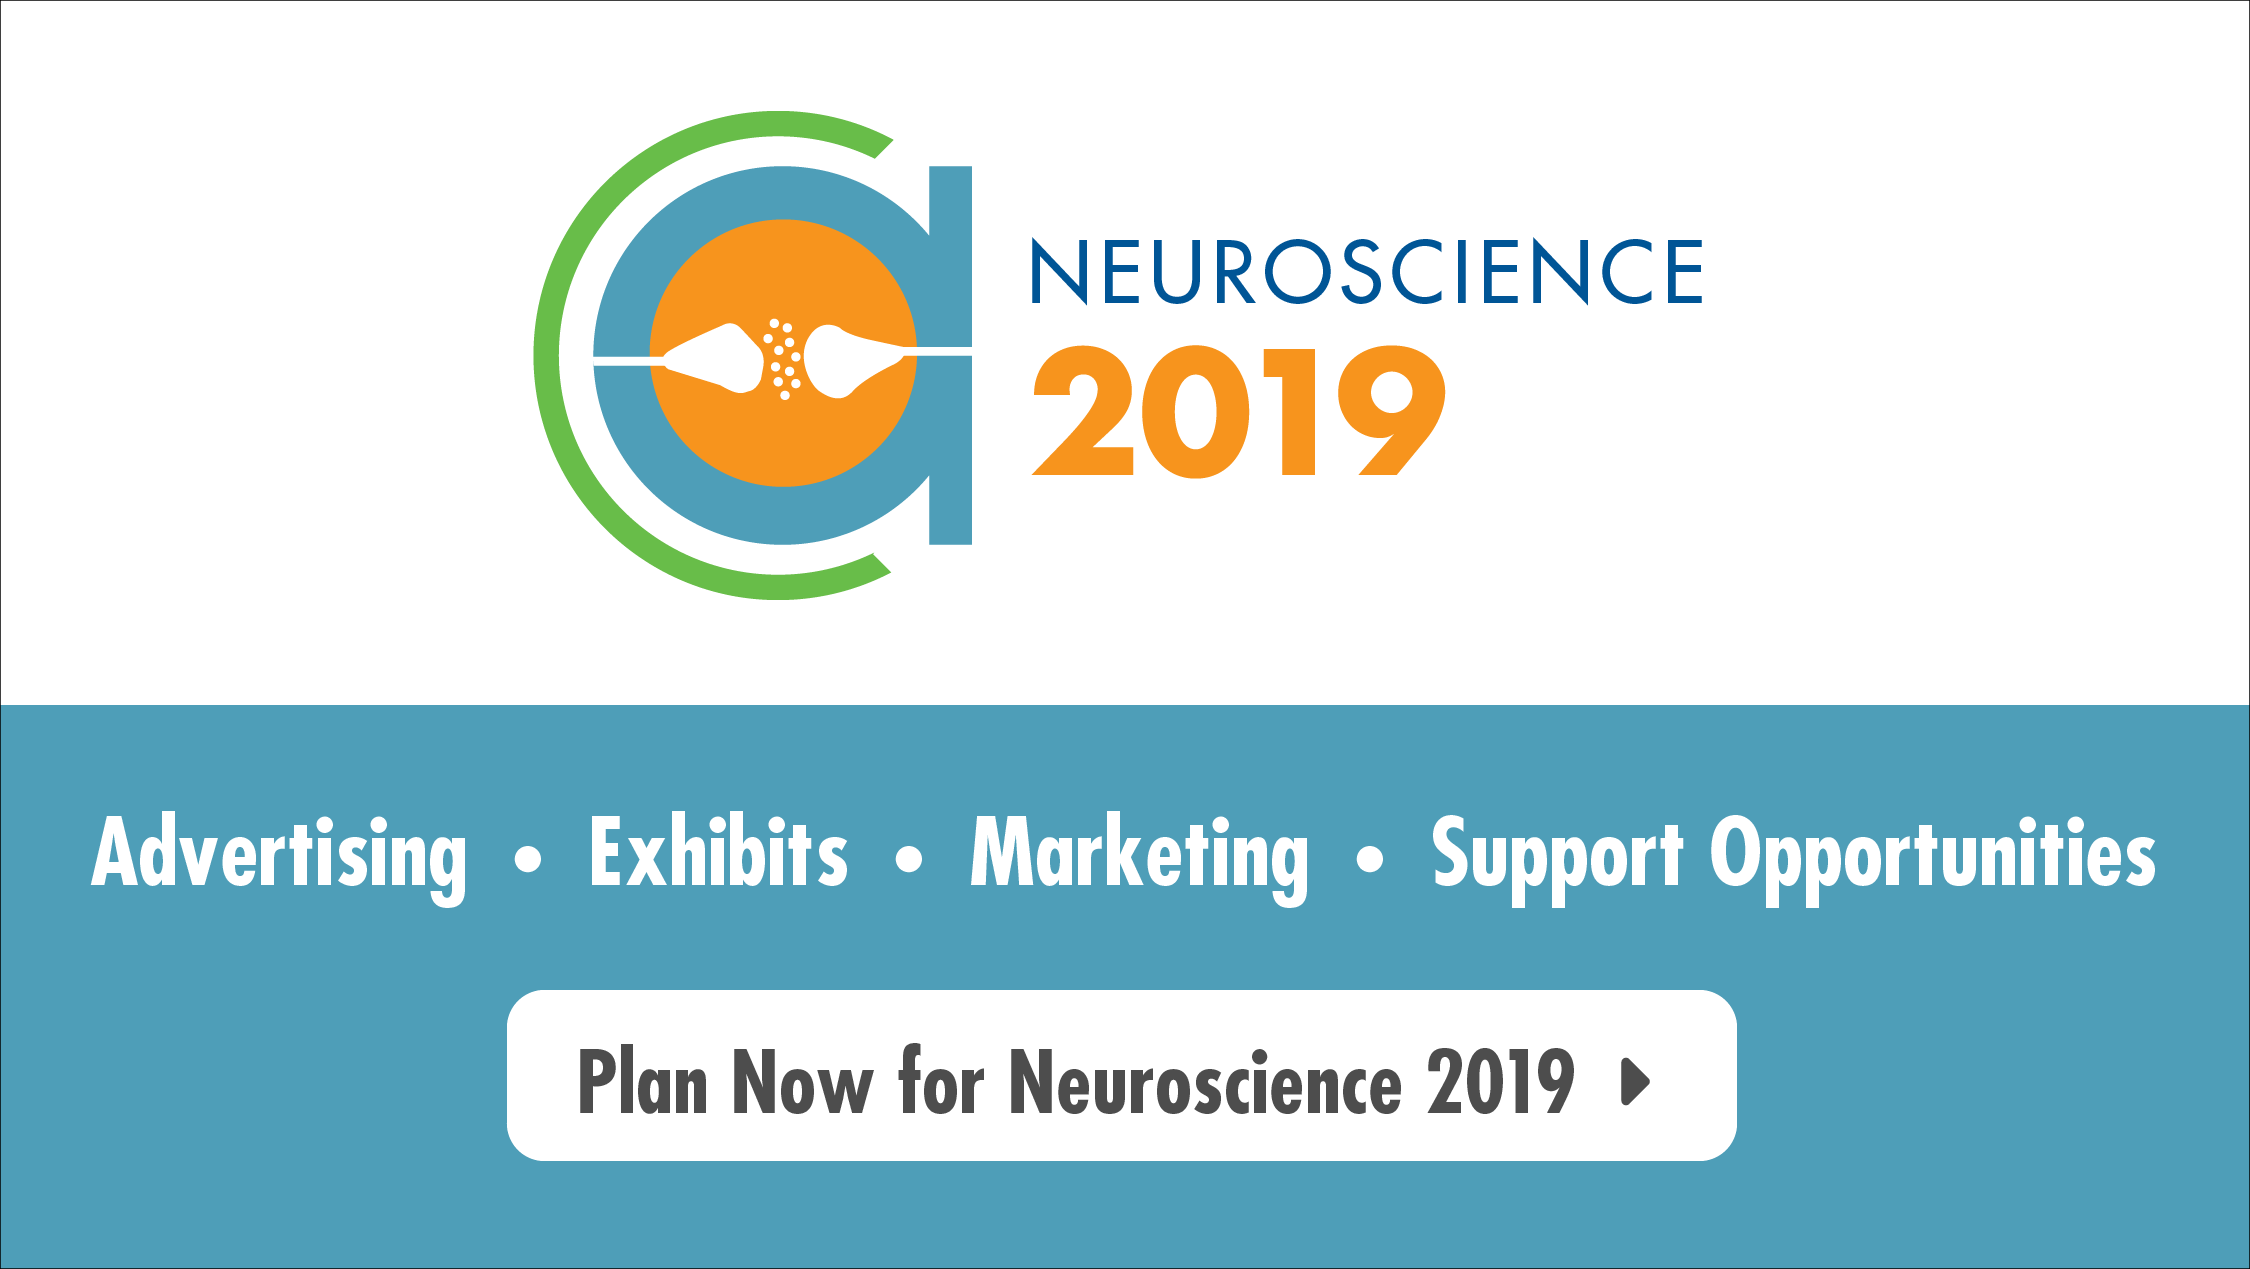 Exhibits, Advertising, Marketing, Support Opportunities advertisement for Neuroscience 2019